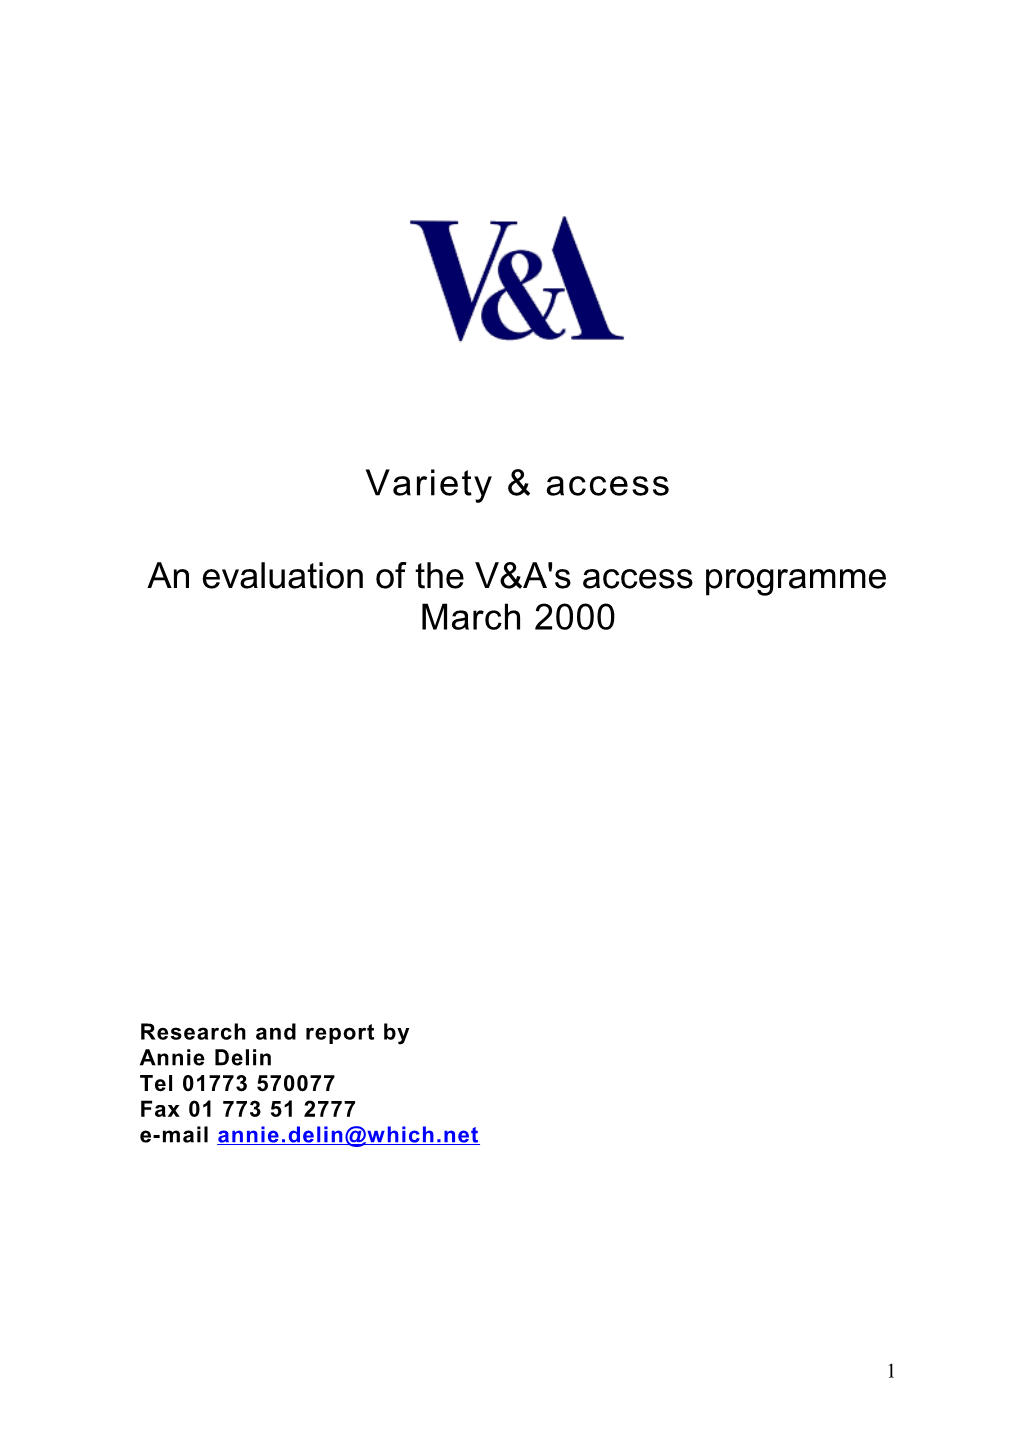 An Evaluation of the V&A's Access Programme